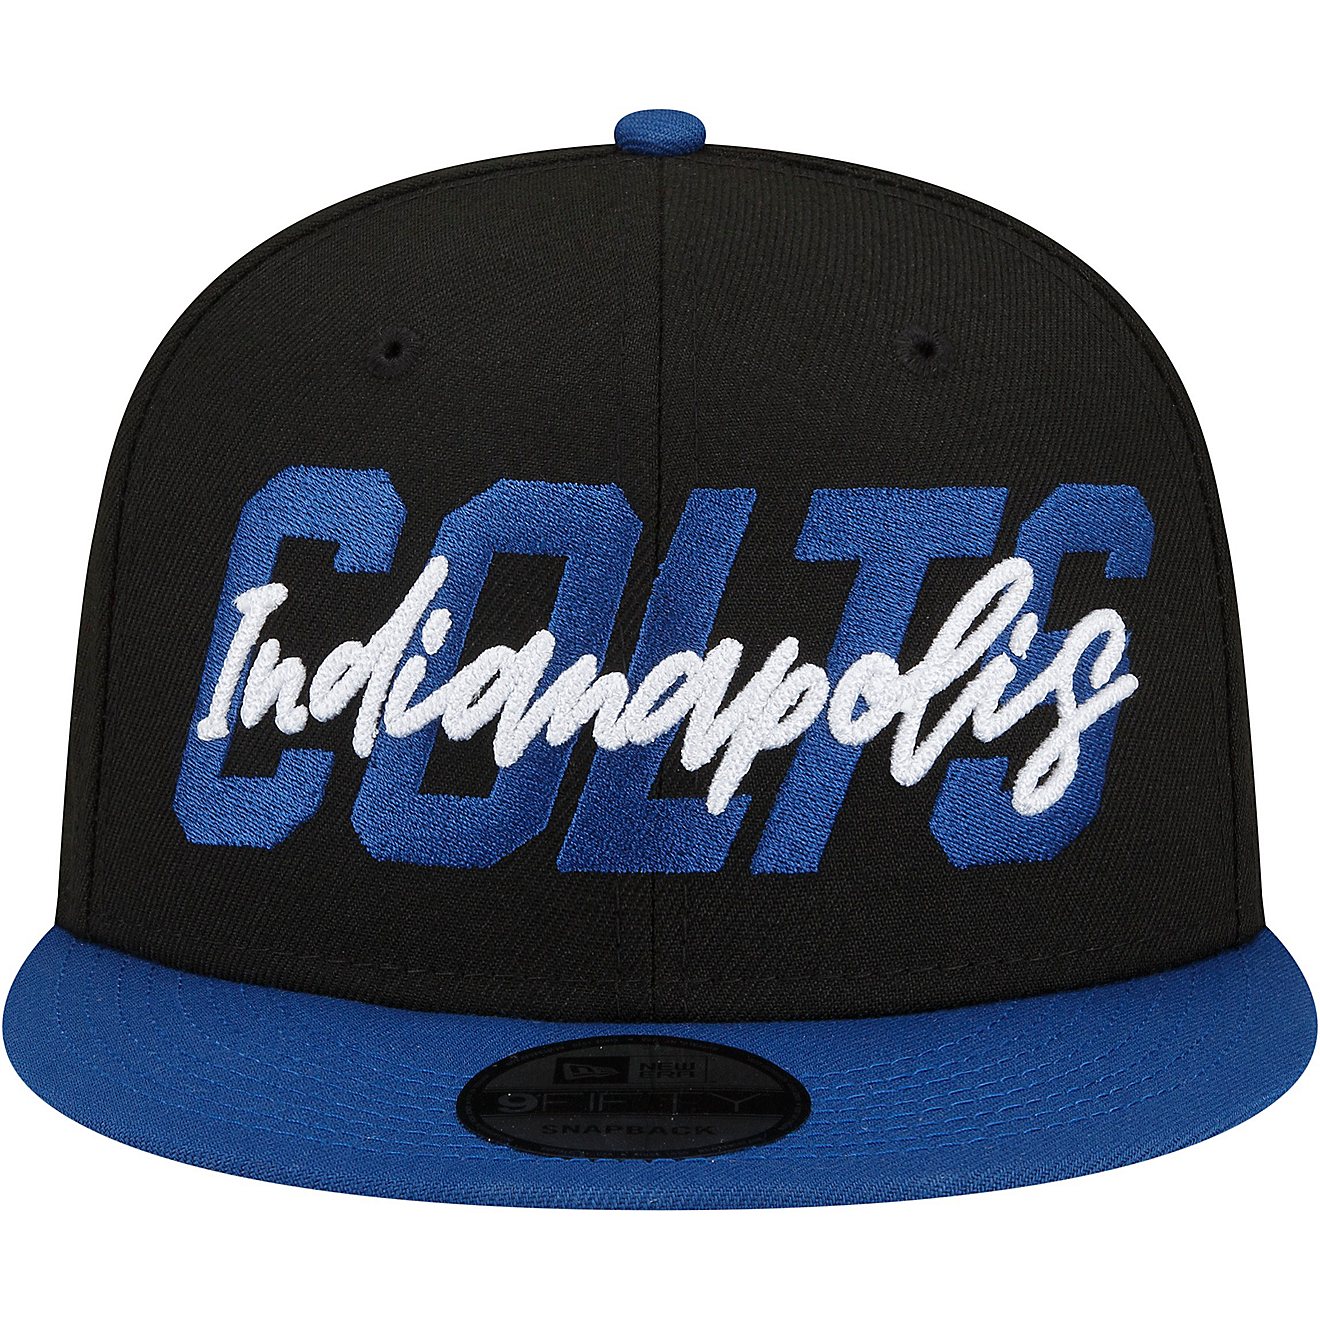 New Era Men's Indianapolis Colts NFL Draft 22 9FIFTY Cap                                                                         - view number 2